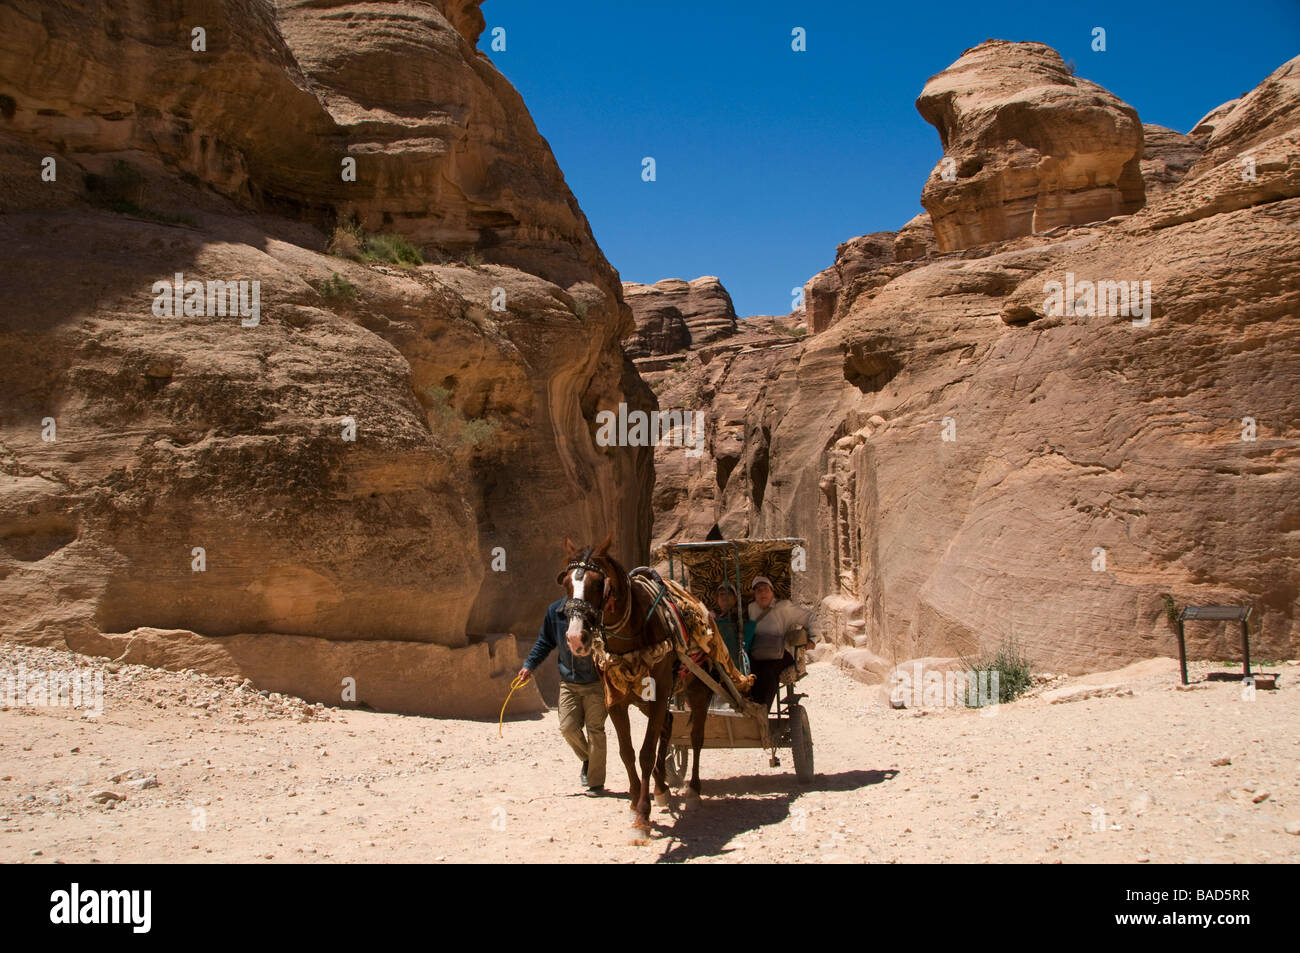 A horse and cart carrying tourists gallops through the Siq narrow gorge in the ancient Nabatean city of Petra Jordan Stock Photo